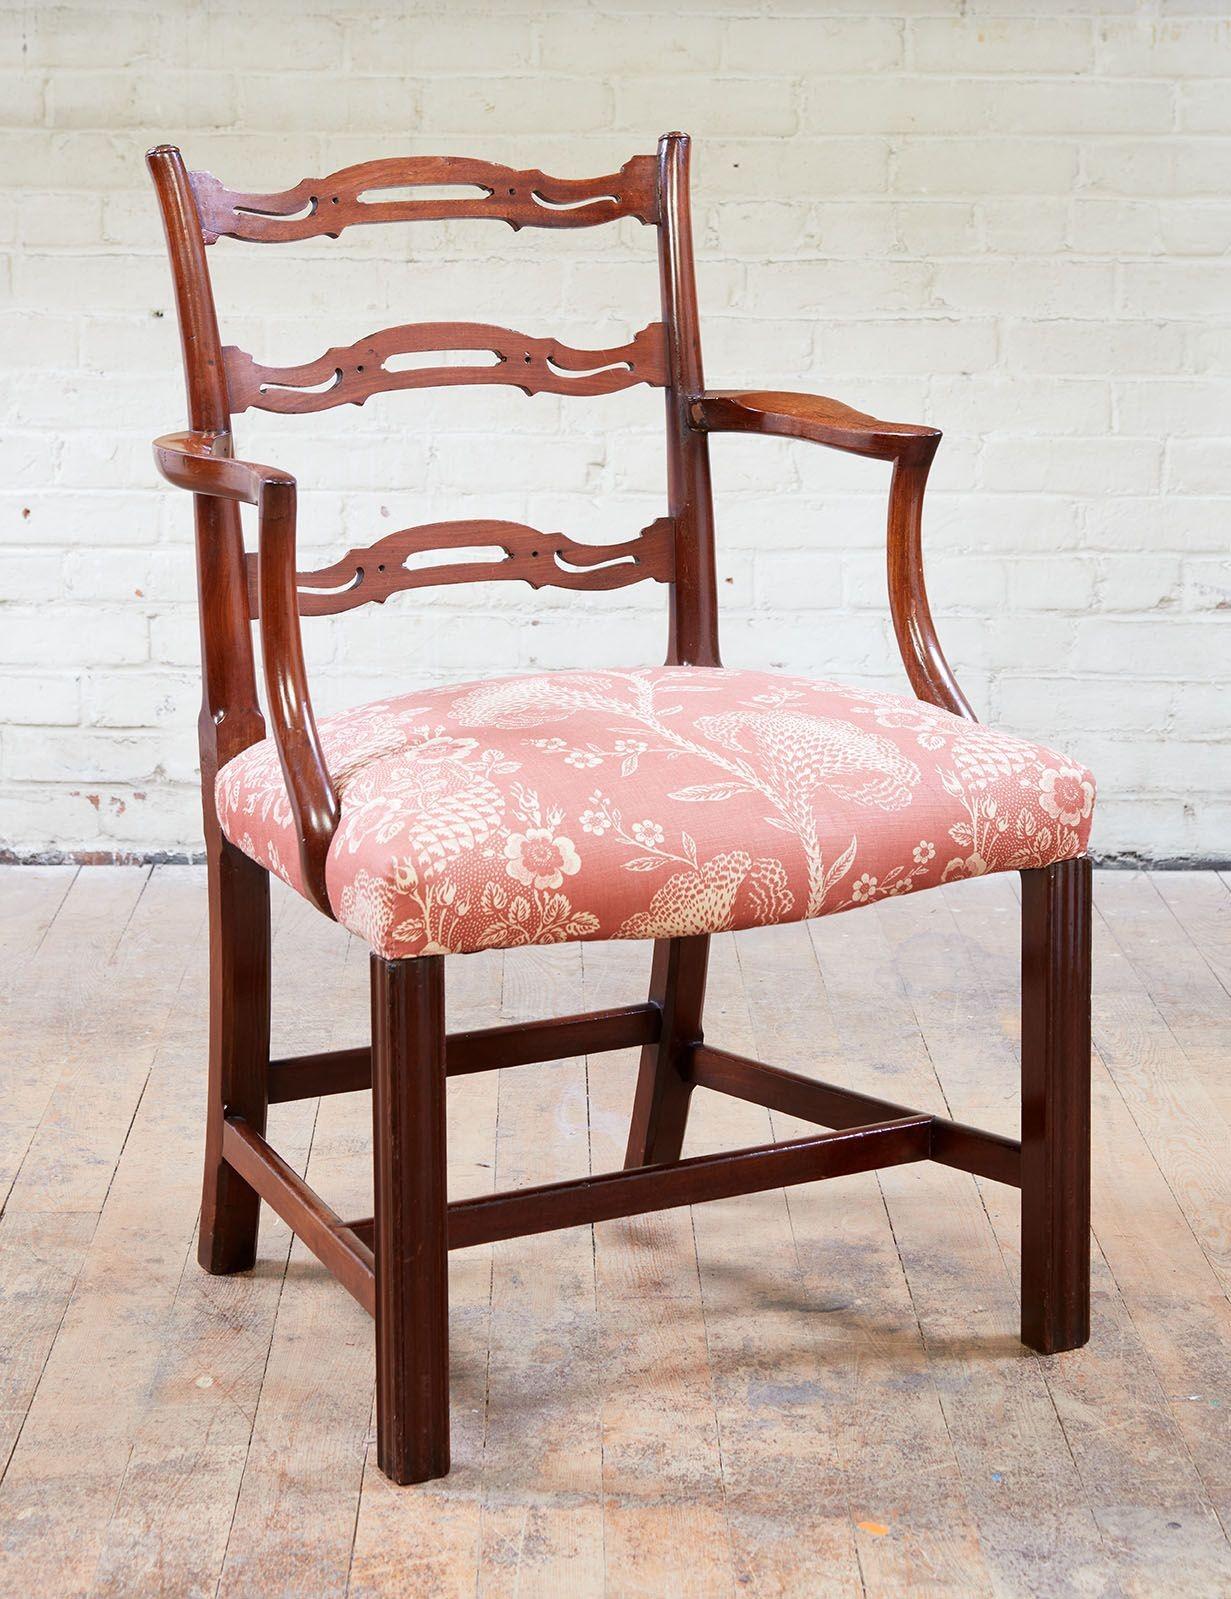 Good pair of George III period mahogany ladder back armchairs having shaped and pierced slats supported by pole shaped stiles, having shaped arms and supports with over upholstered seats and standing on molded Marlborough front legs and raked rear